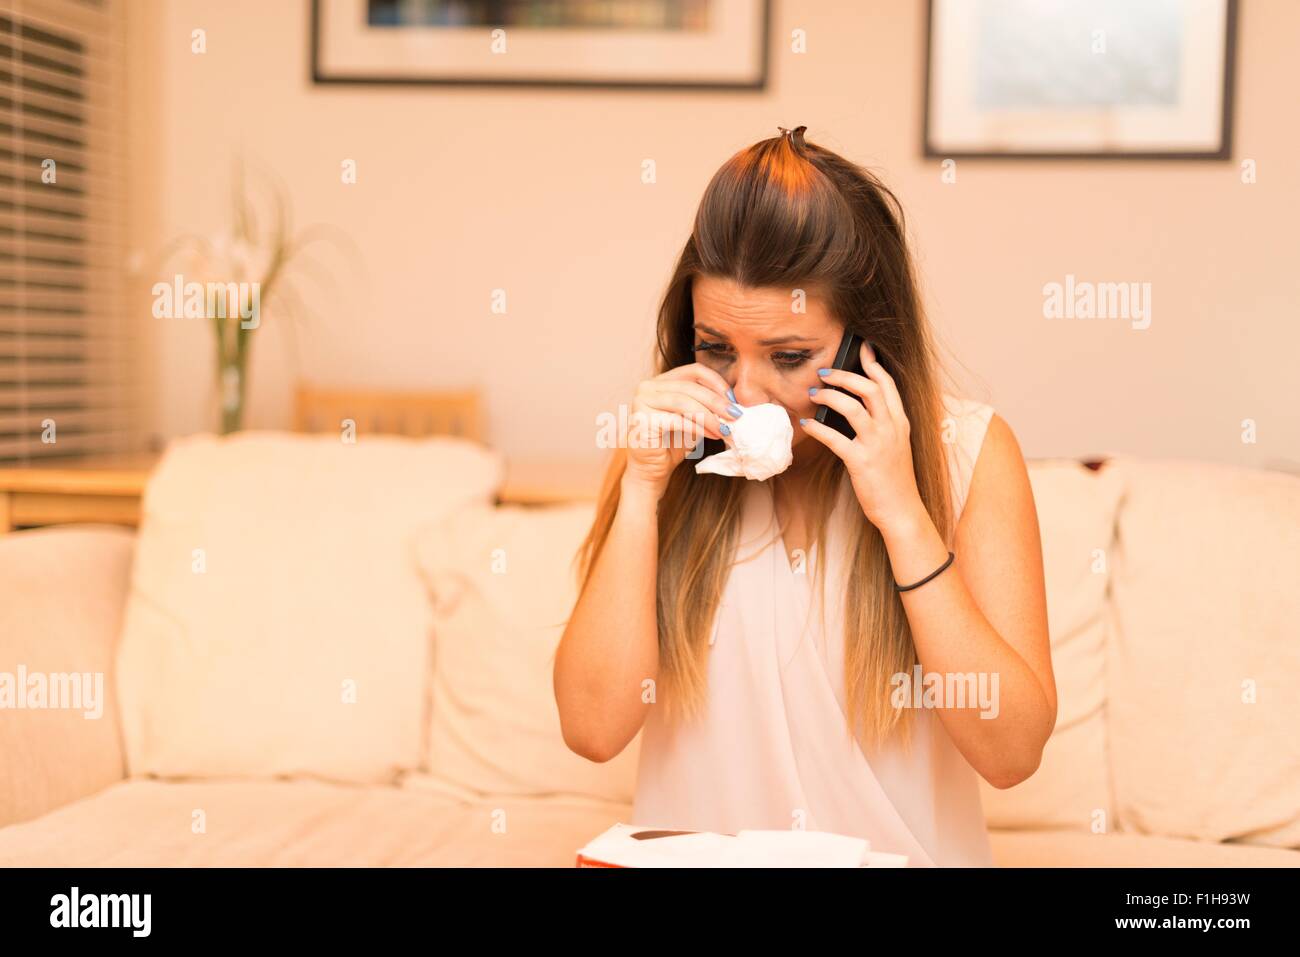 Young woman having telephone conversation, crying Stock Photo